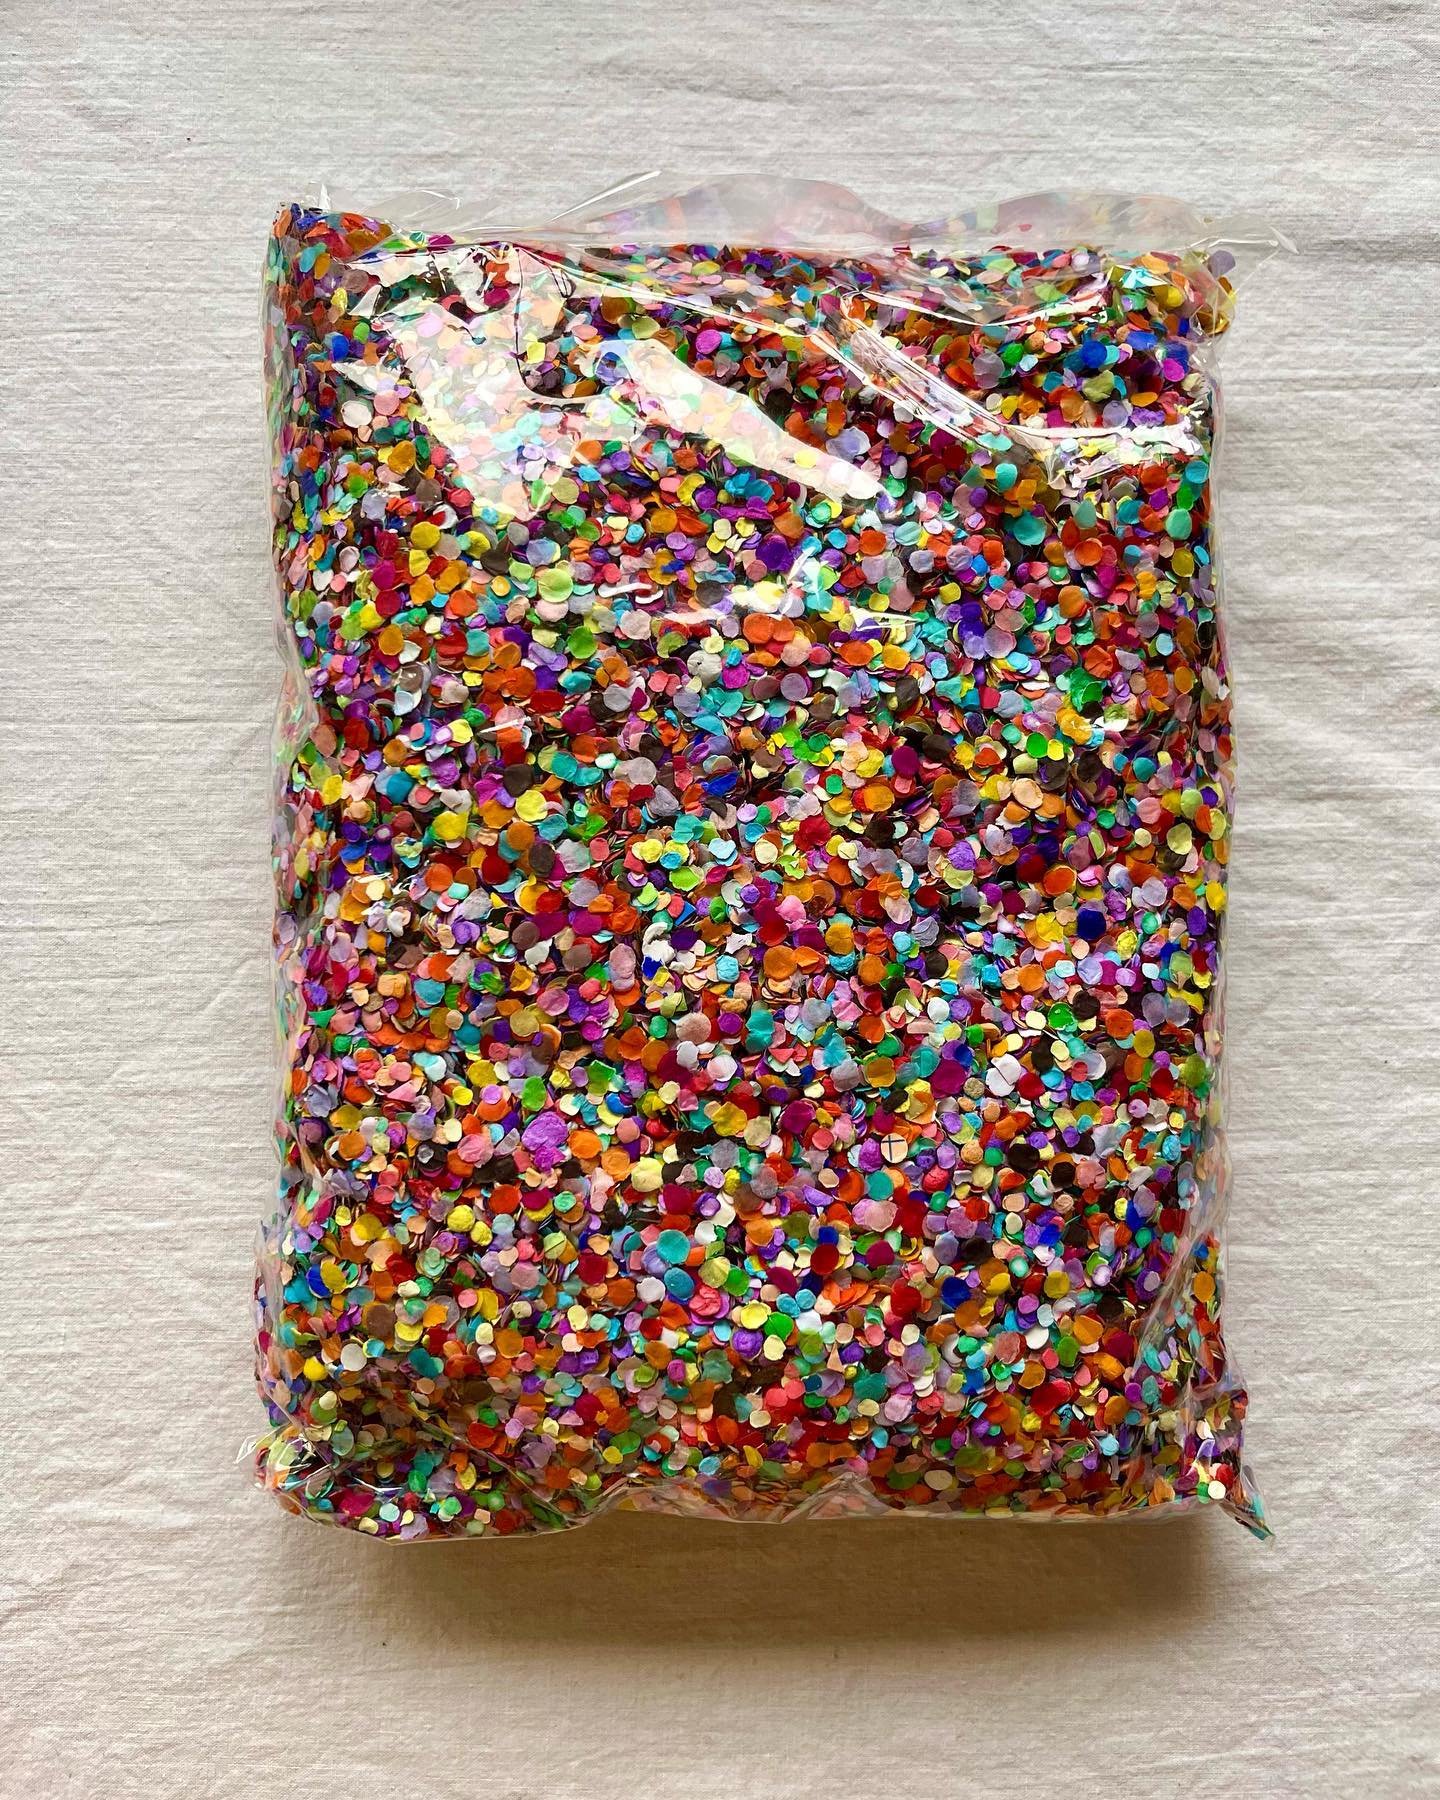 Over the course of 2023, I used up a whole bag of confetti. The 2024 confetti arrived this morning. 

Here&rsquo;s to a joy, in all of its bright tiny bits.